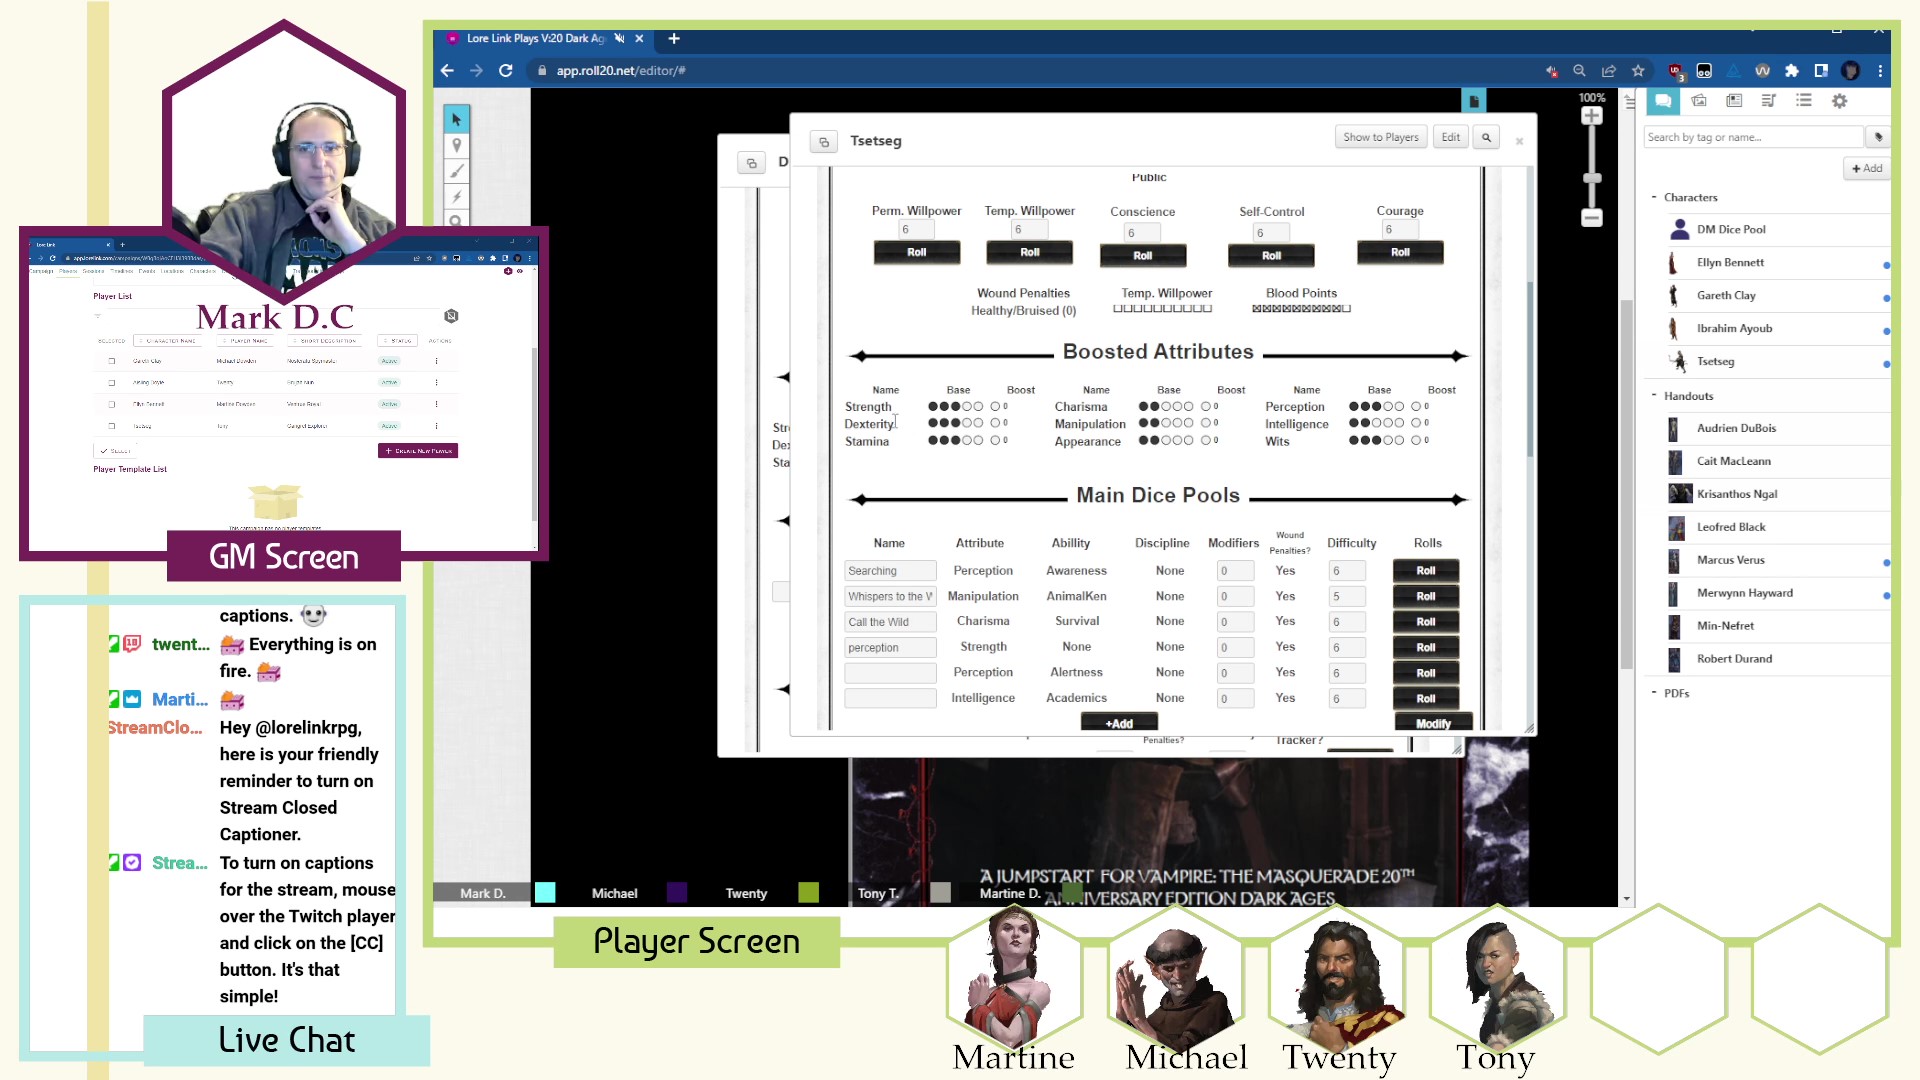 Mark D.C. leads a tabletop roleplaying game in Roll20 on Twitch. The game being played is Vampire: The Masquerade Dark Ages. Martine, Michael, Twenty, and Tony are all shown as players. Currently Mark is looking at the campaign in Lore Link as well as a character sheet in Roll20.